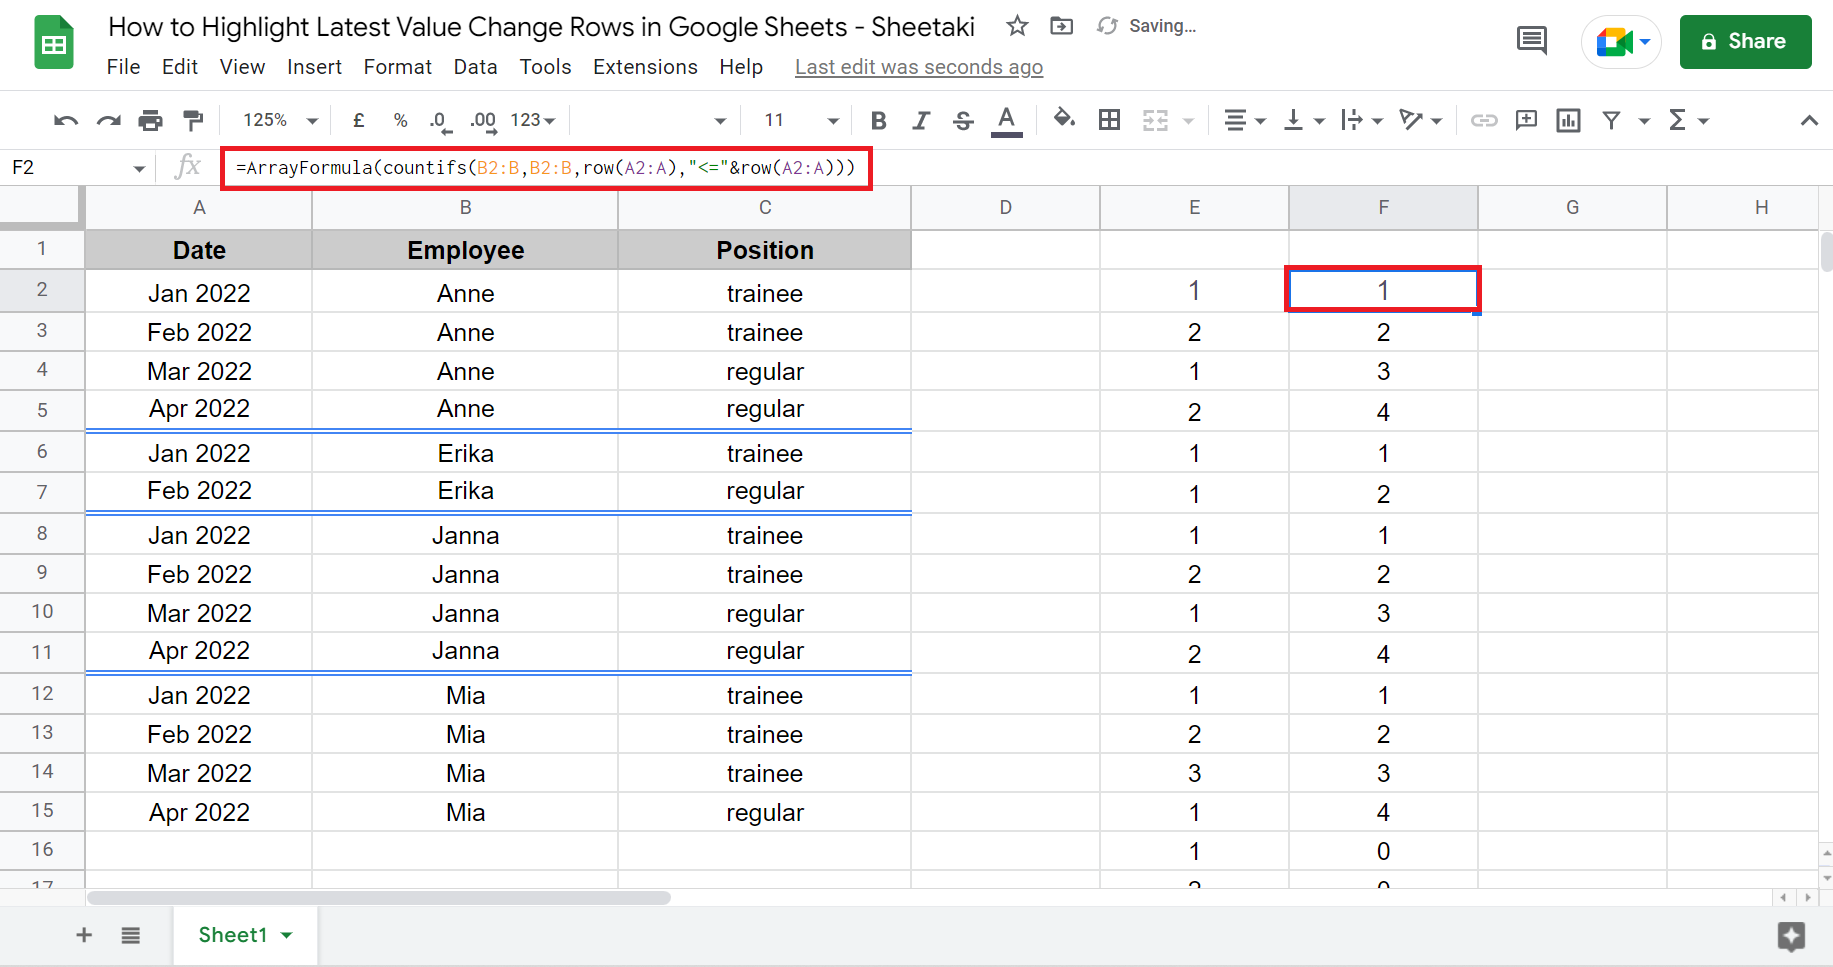 Highlight Latest Value Change Rows in Google Sheets